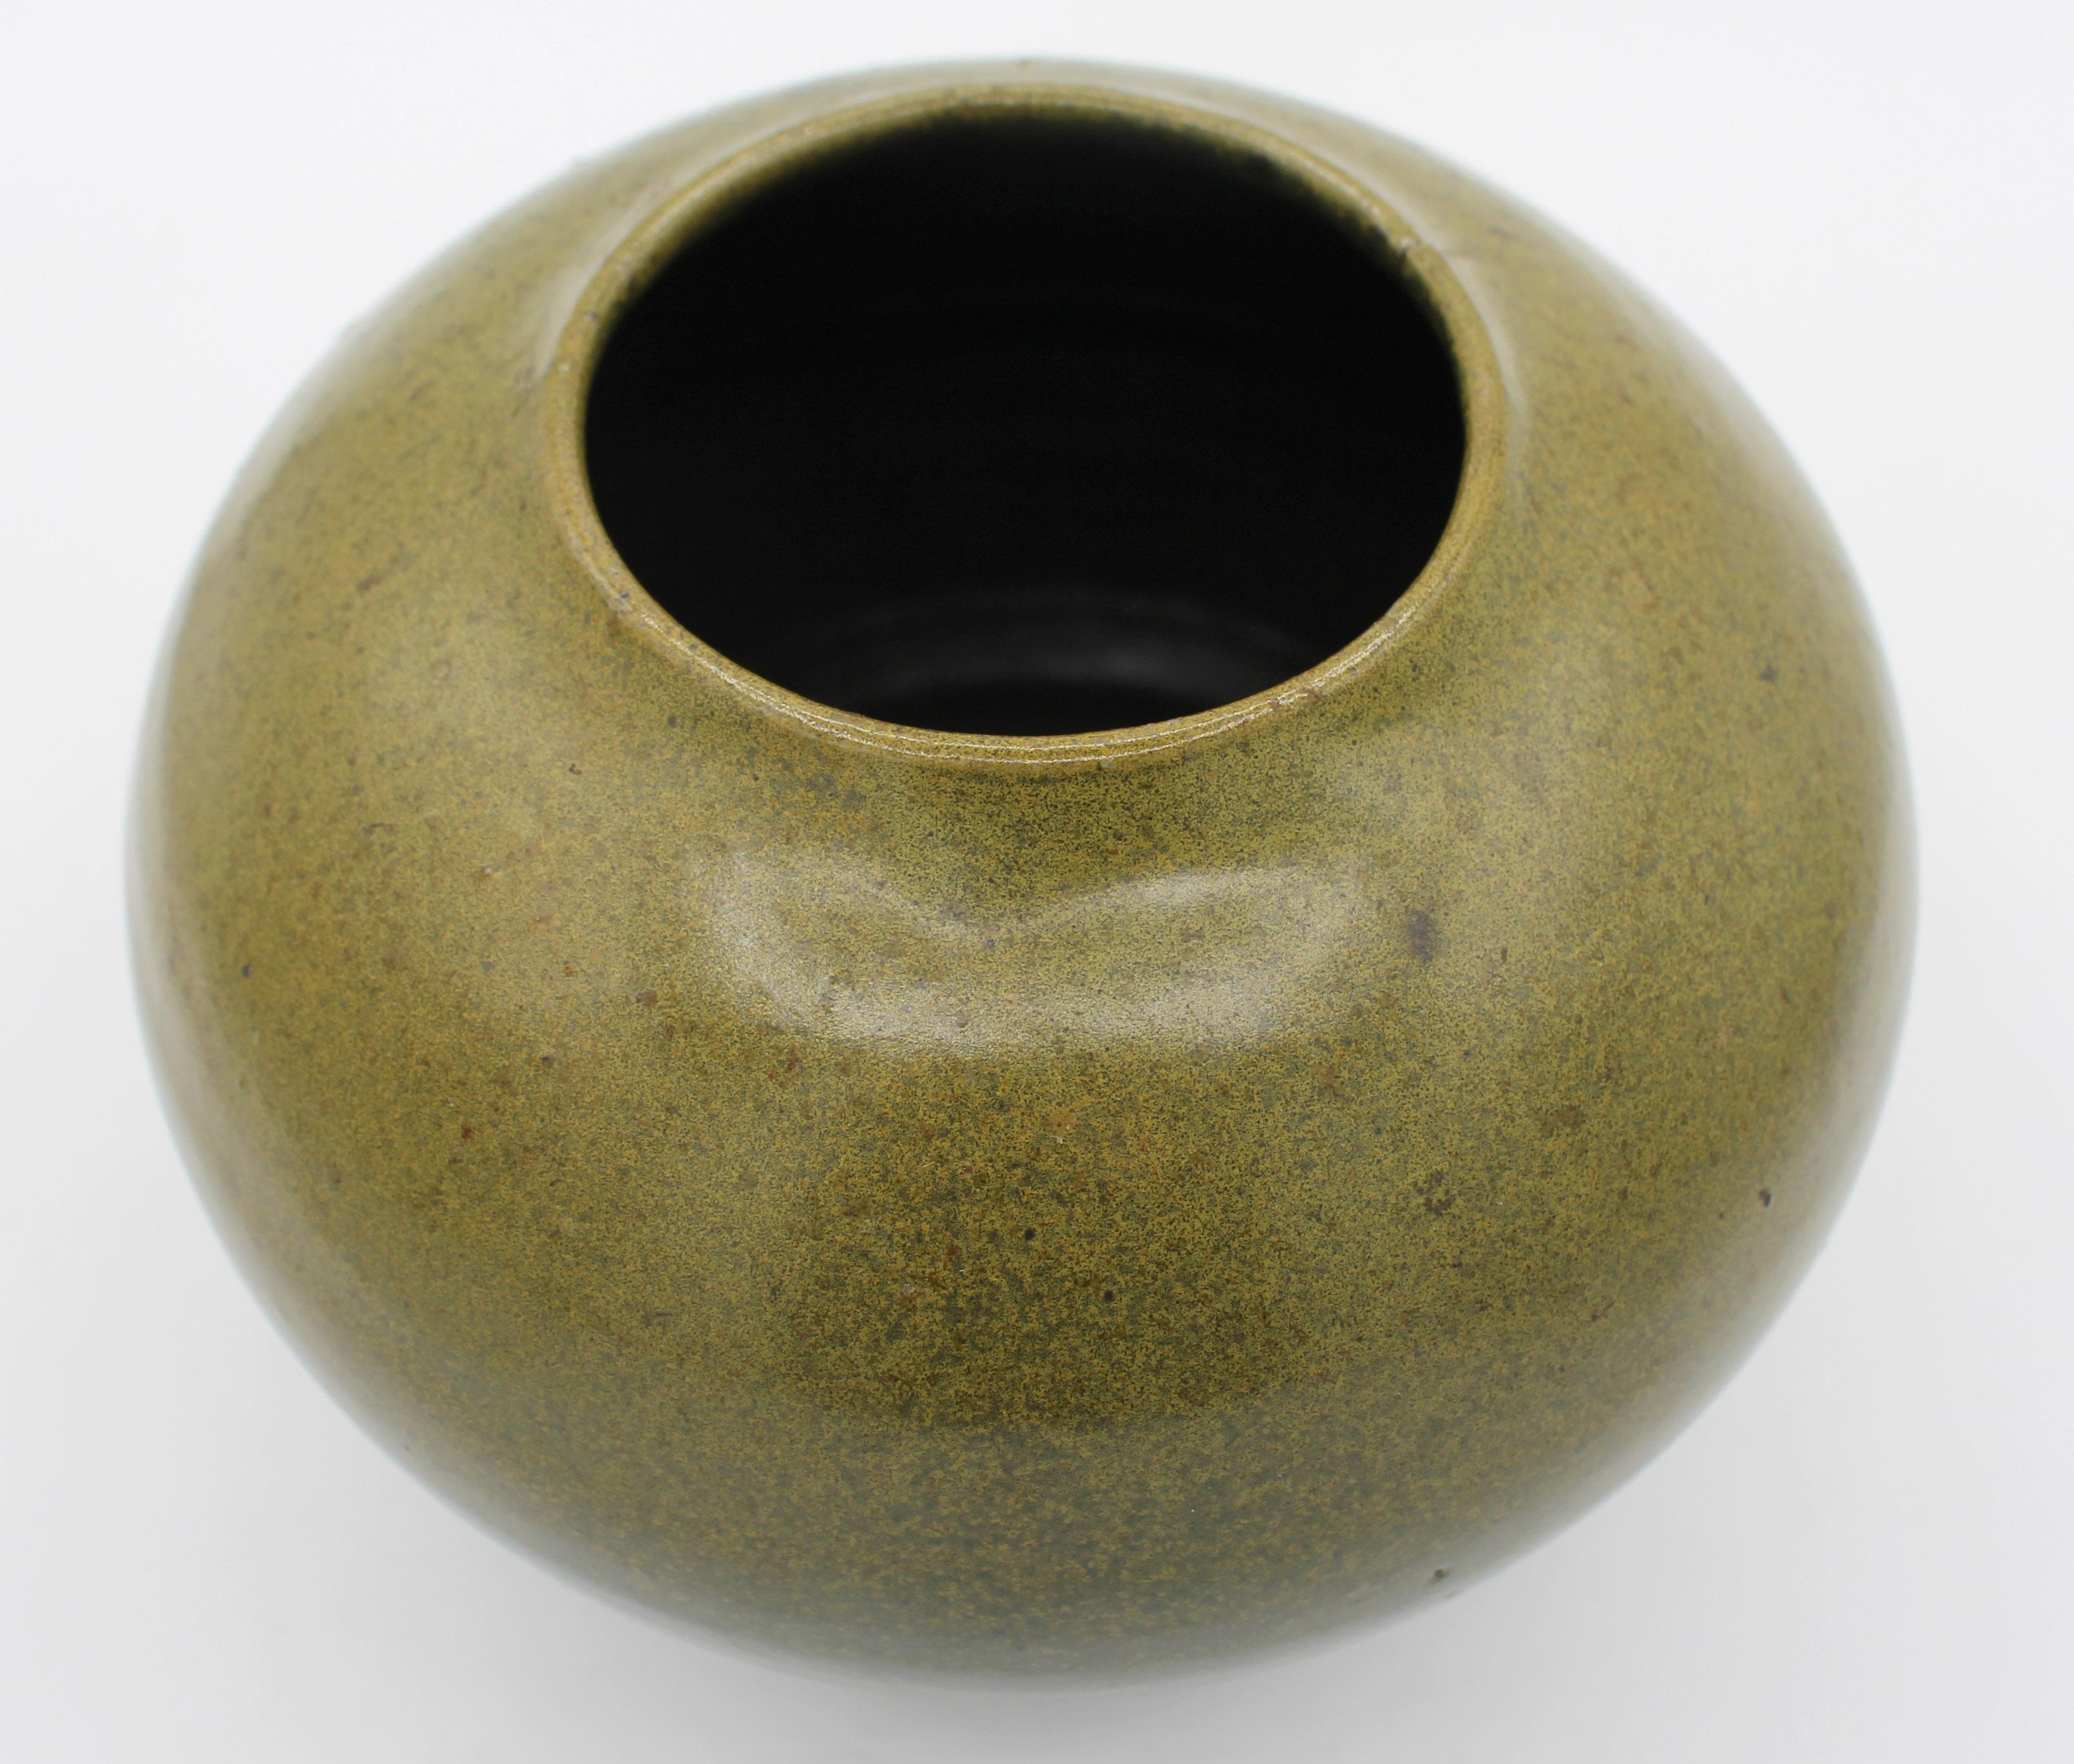 Mid-20th century Jugtown Ware pottery vase. Frogskin glazed; Asian influence design. Stamped 